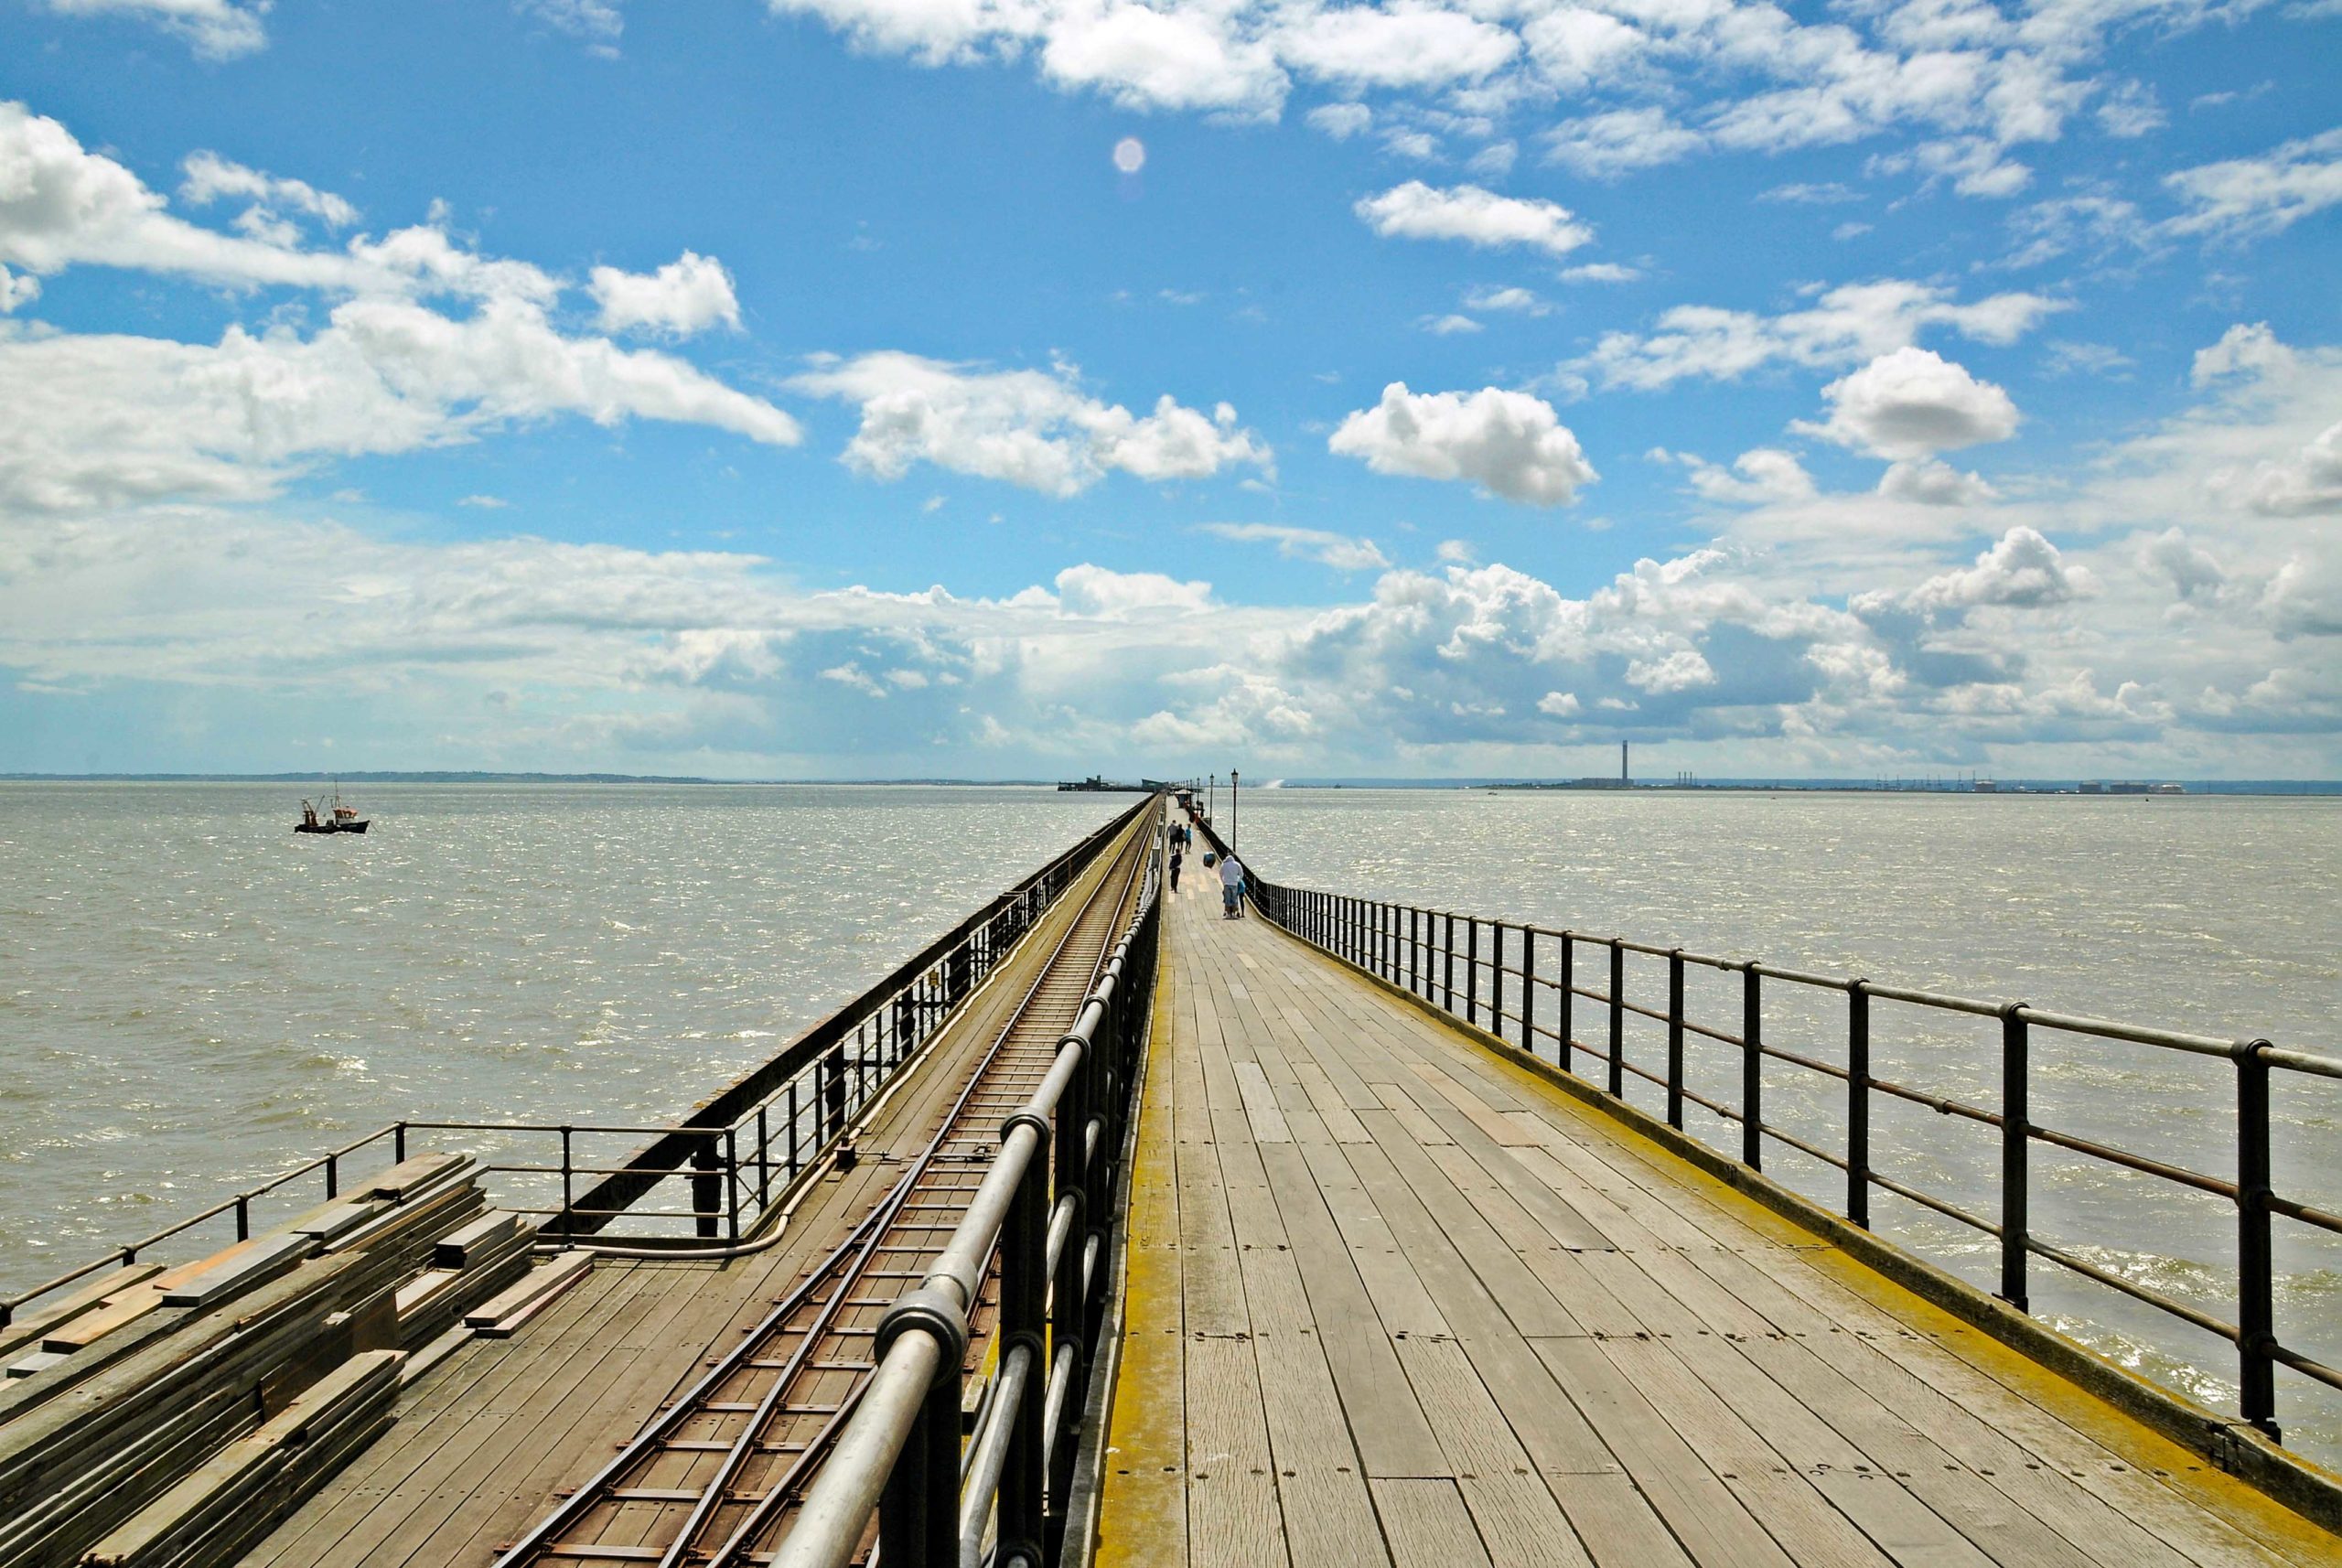 Southend Pier © Beata May - licence [CC BY-SA 3.0] from Wikimedia Commons